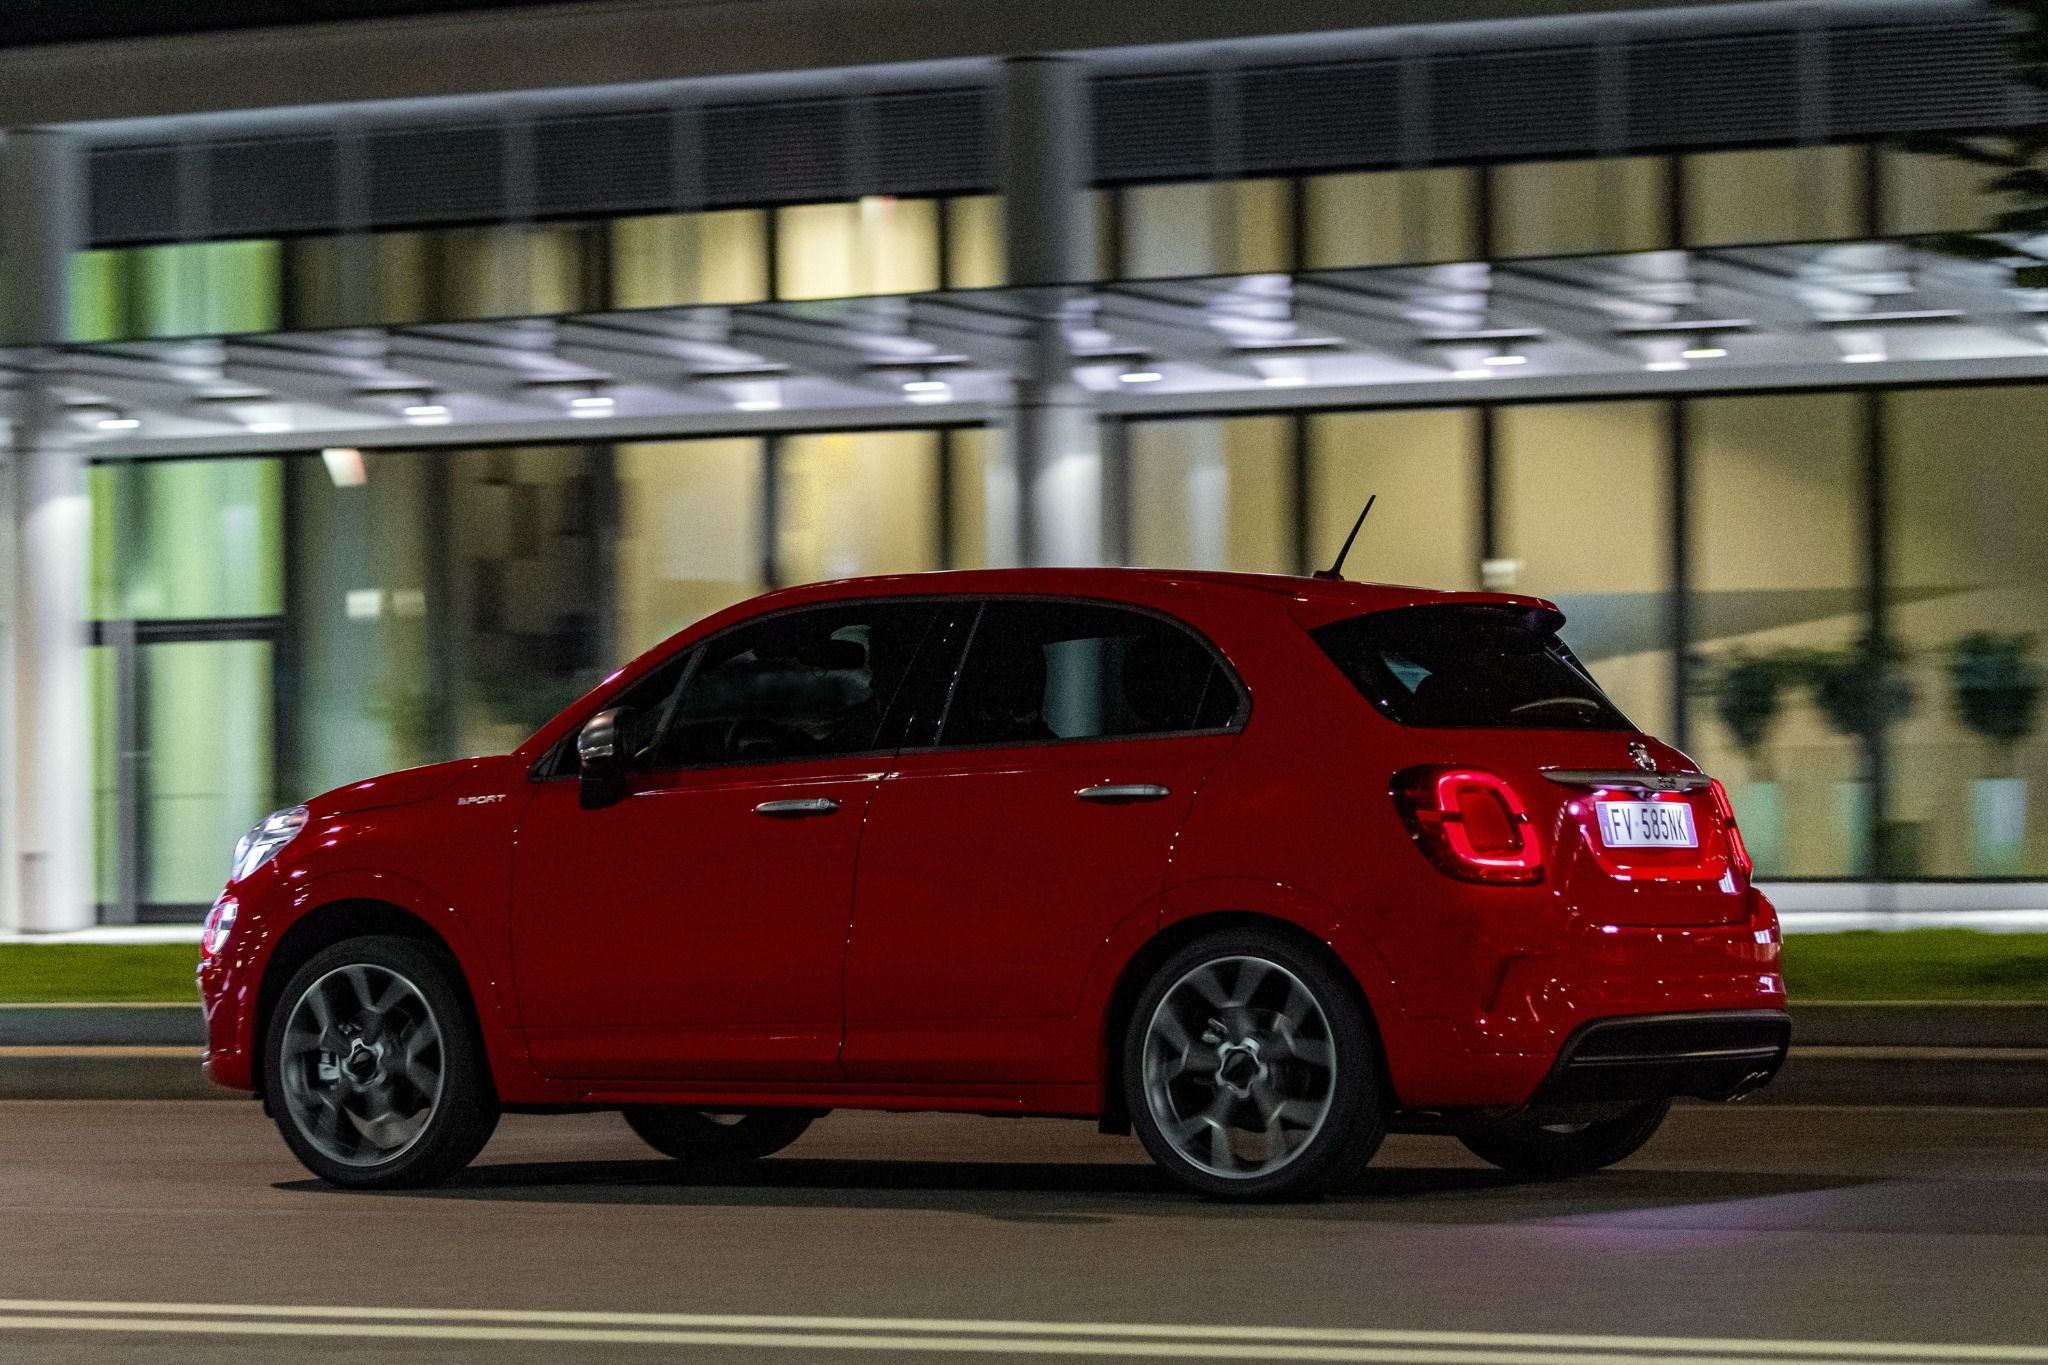 Side view of red Fiat 500x Sport driving on a road